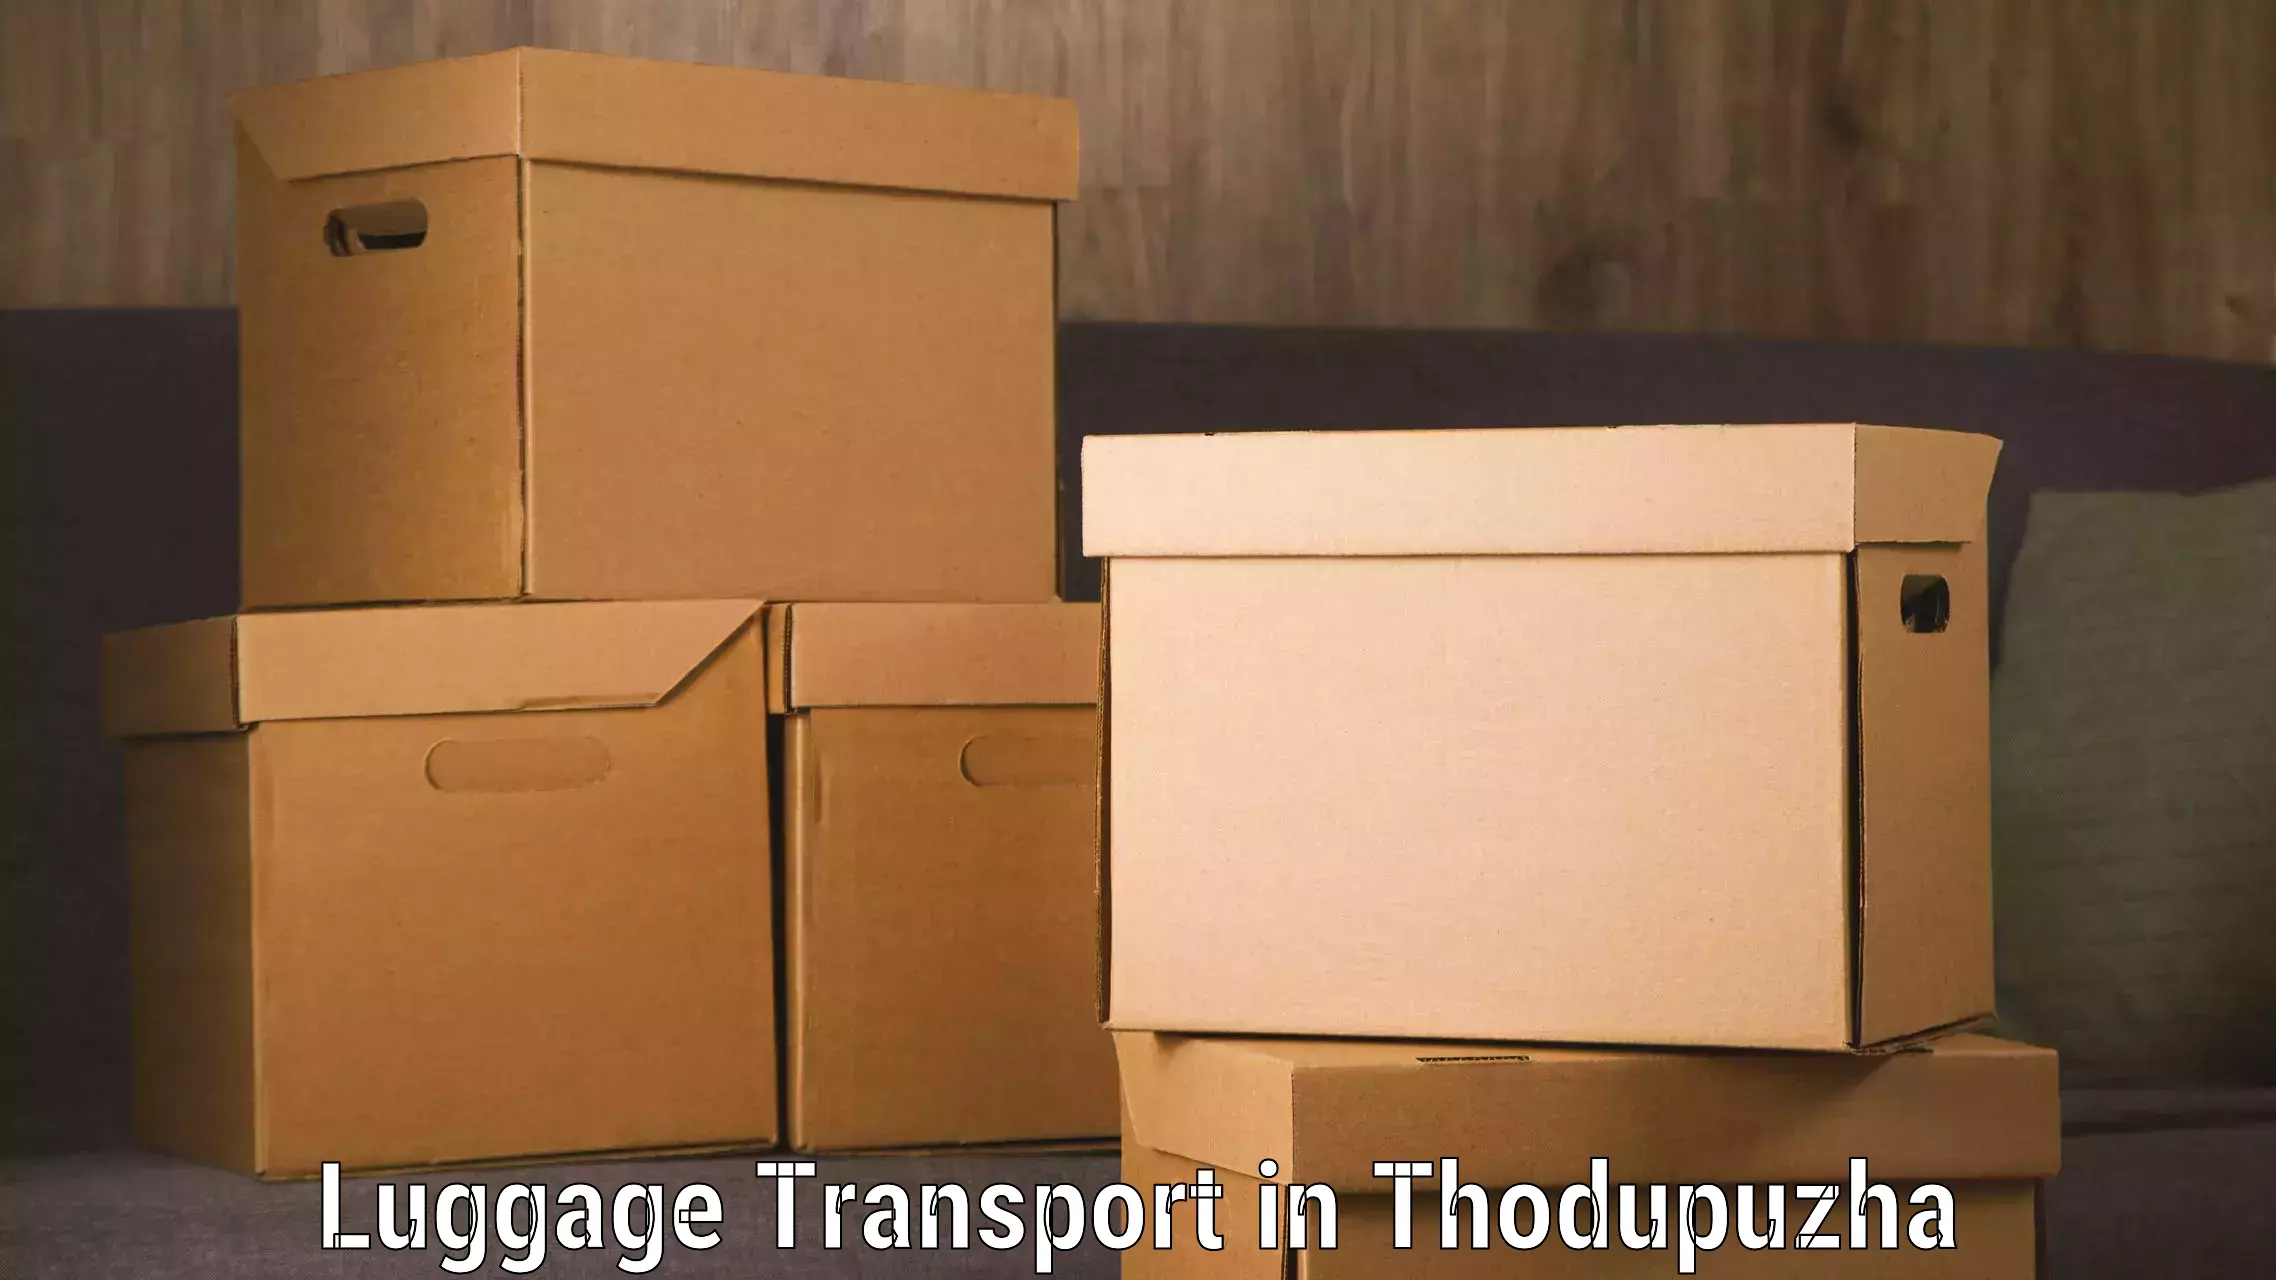 Safe luggage delivery in Thodupuzha